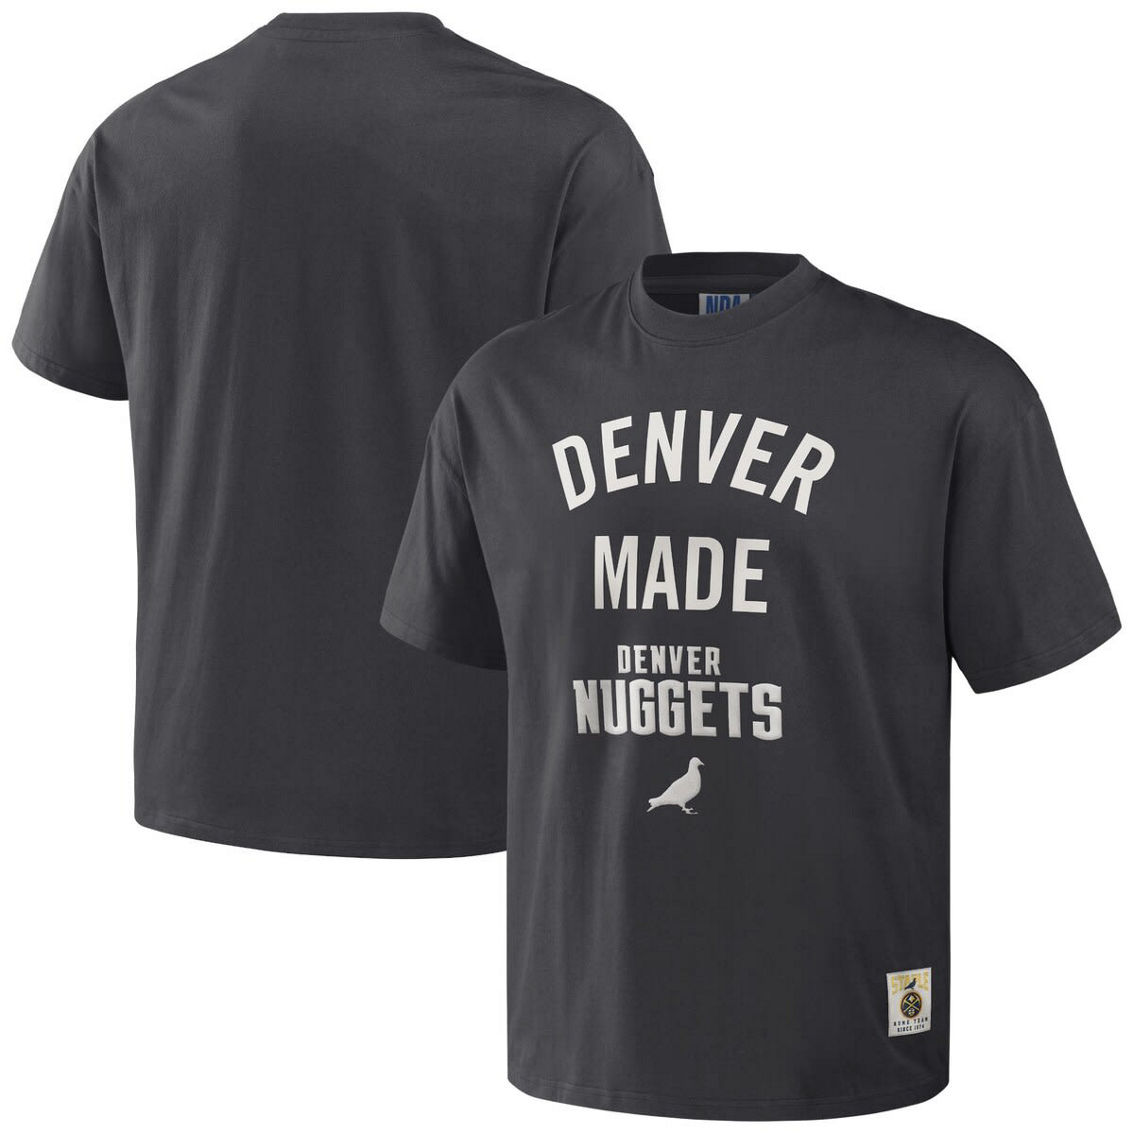 Staple Men's NBA x Anthracite Denver Nuggets Heavyweight Oversized T-Shirt - Image 2 of 4